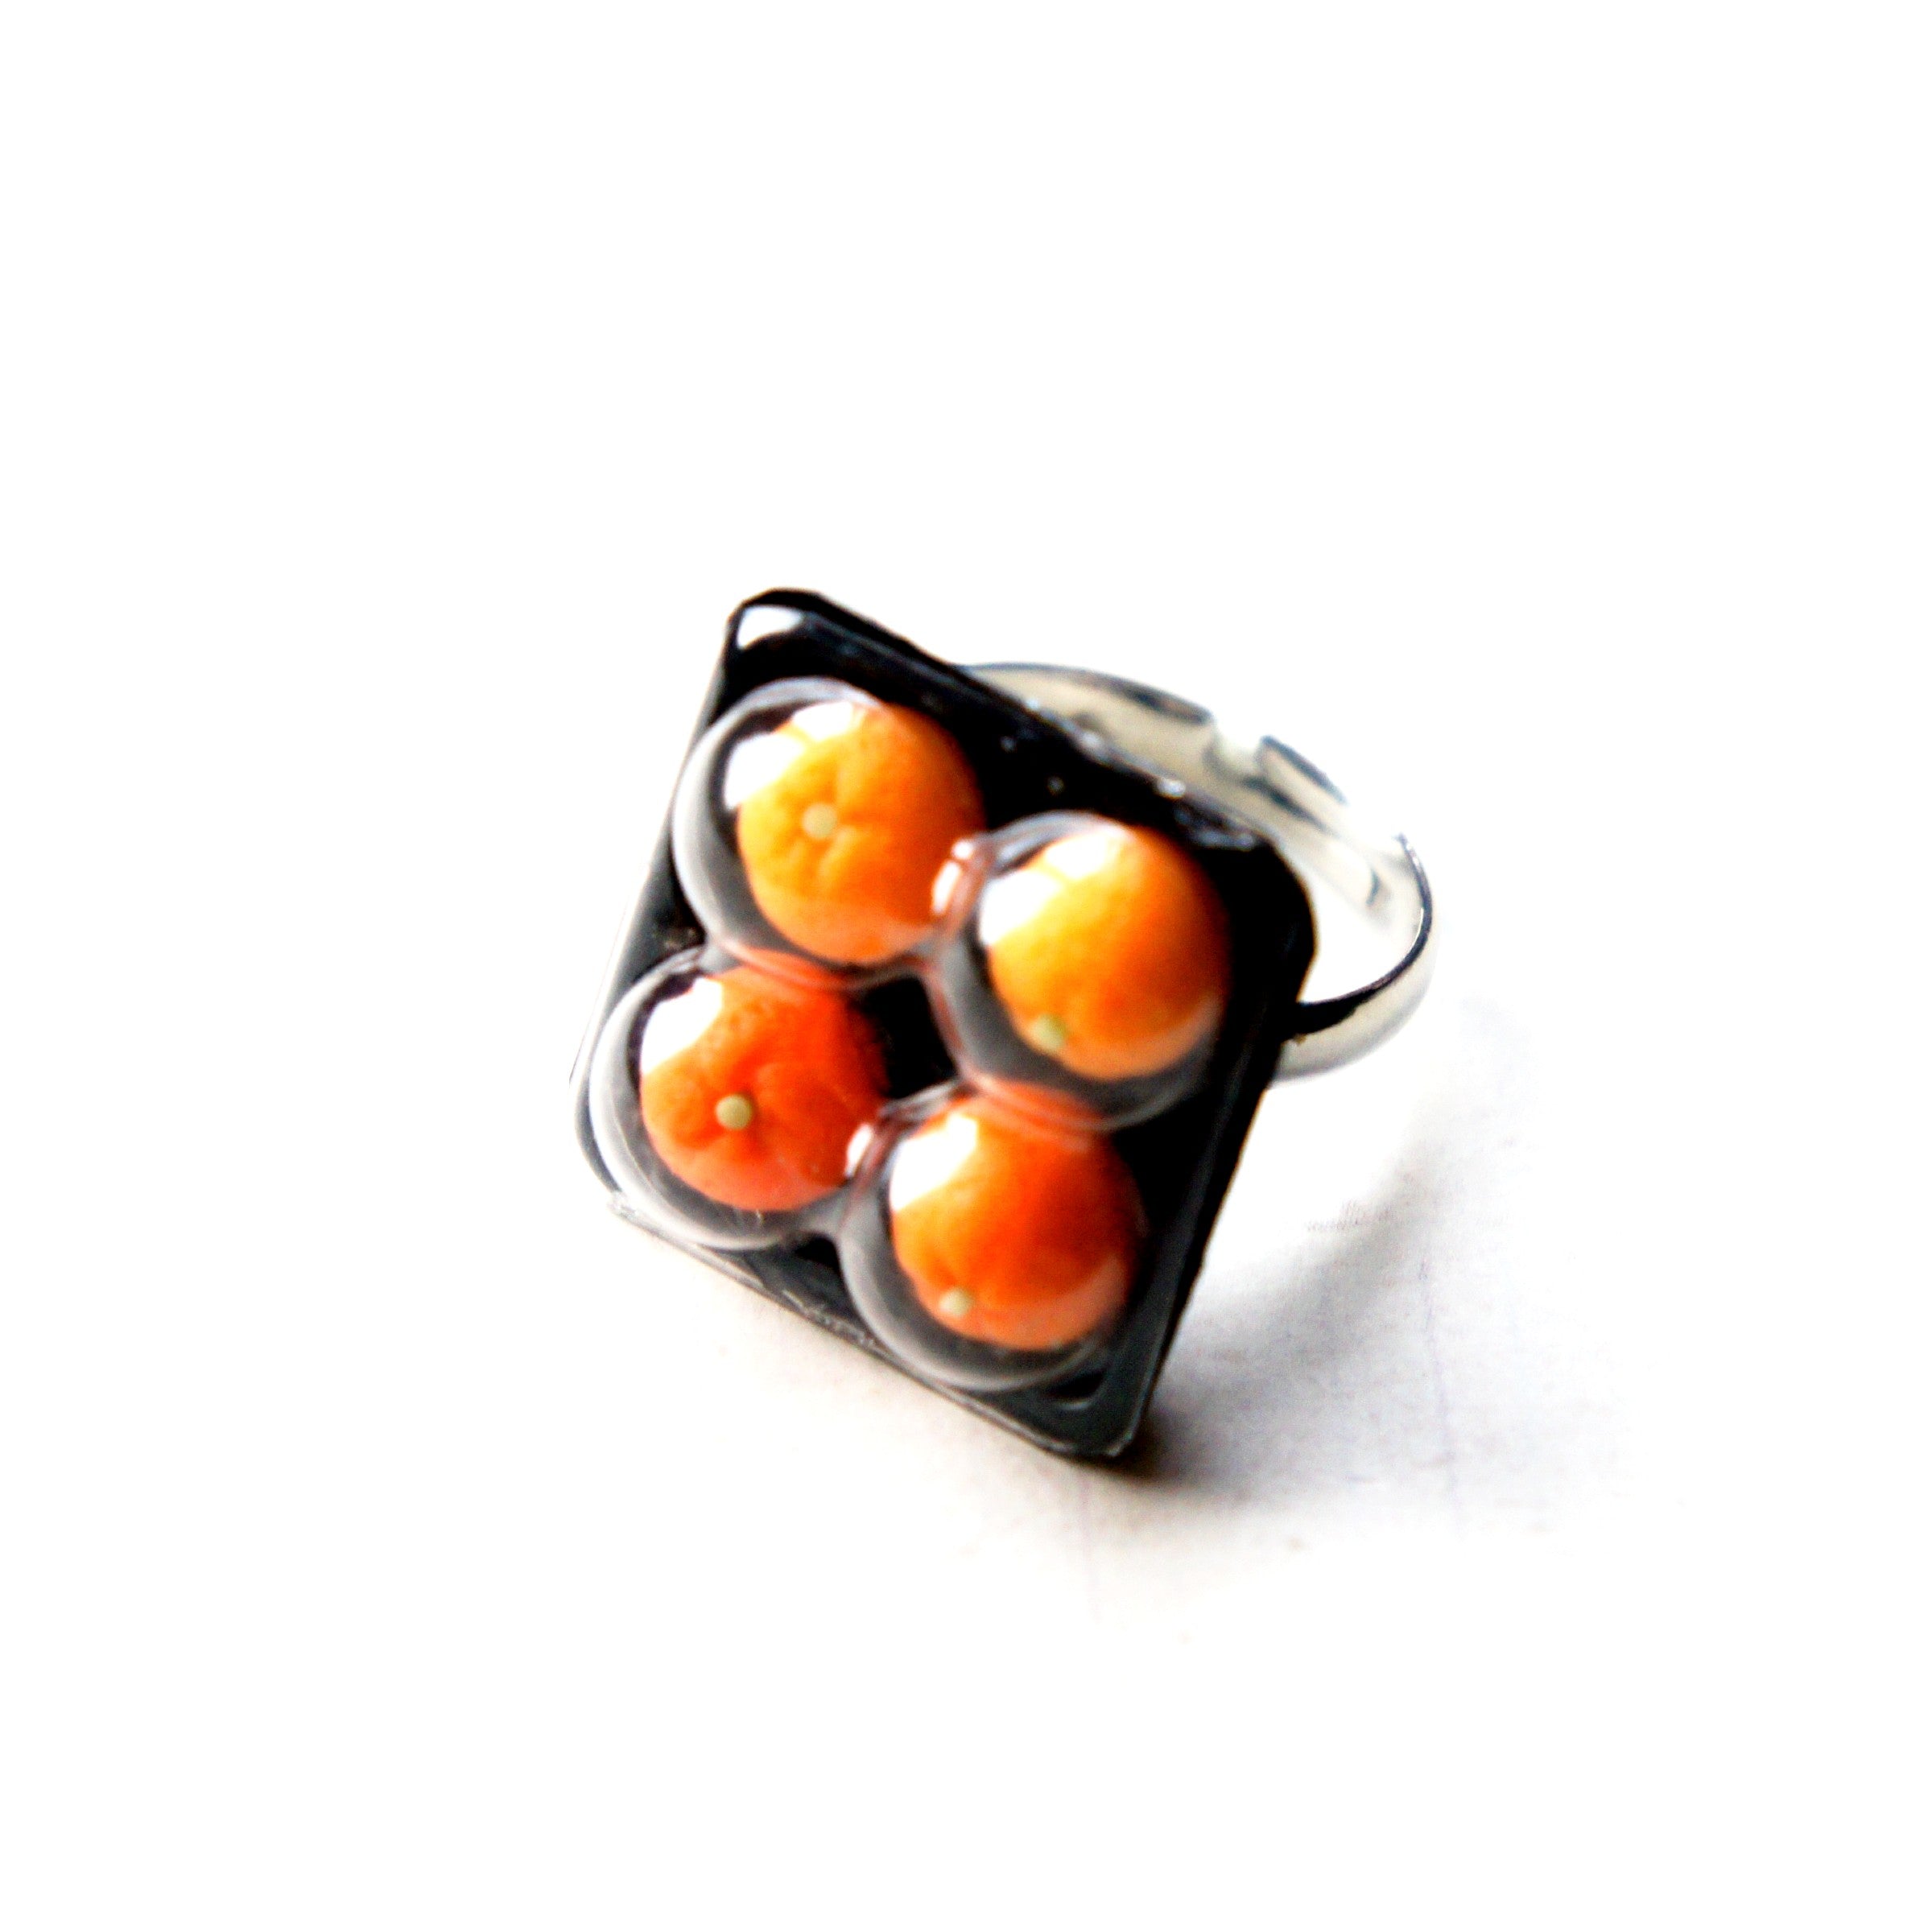 Orange Tray Ring - Jillicious charms and accessories